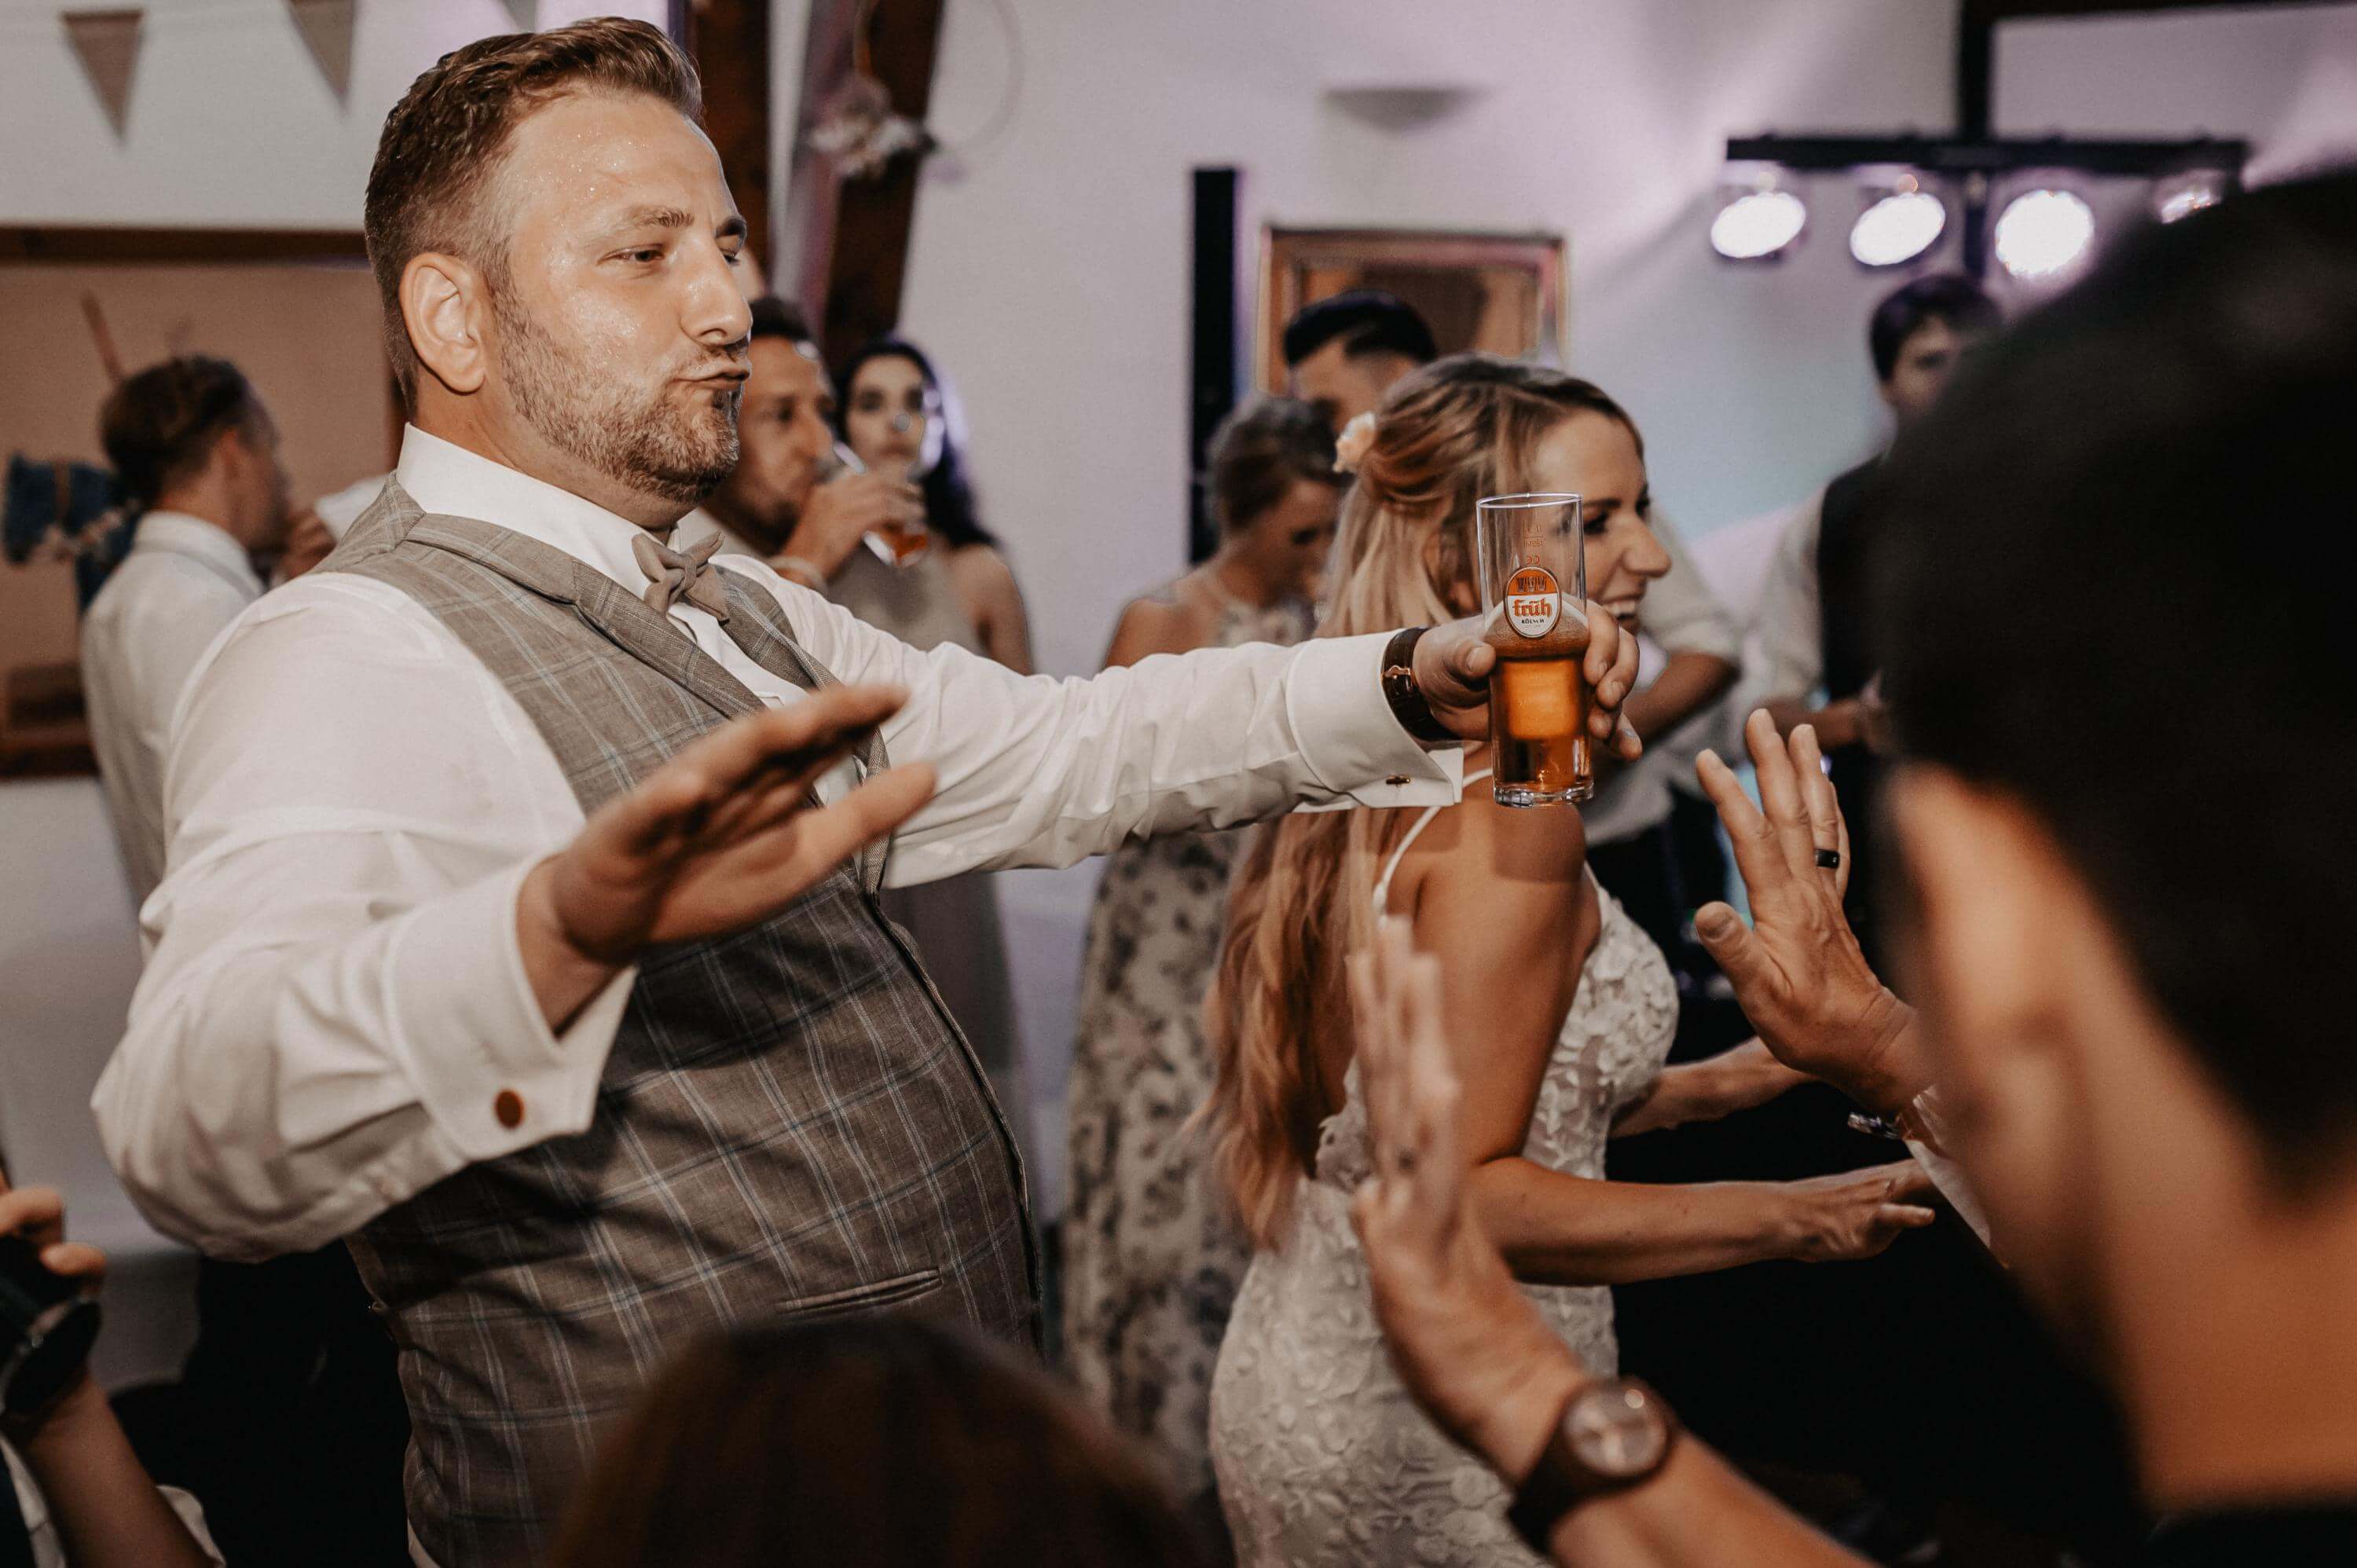 In the late evening, with a beer glass in hand, the groom dances exuberantly next to the bride on the dance floor in a barn together with the wedding party.